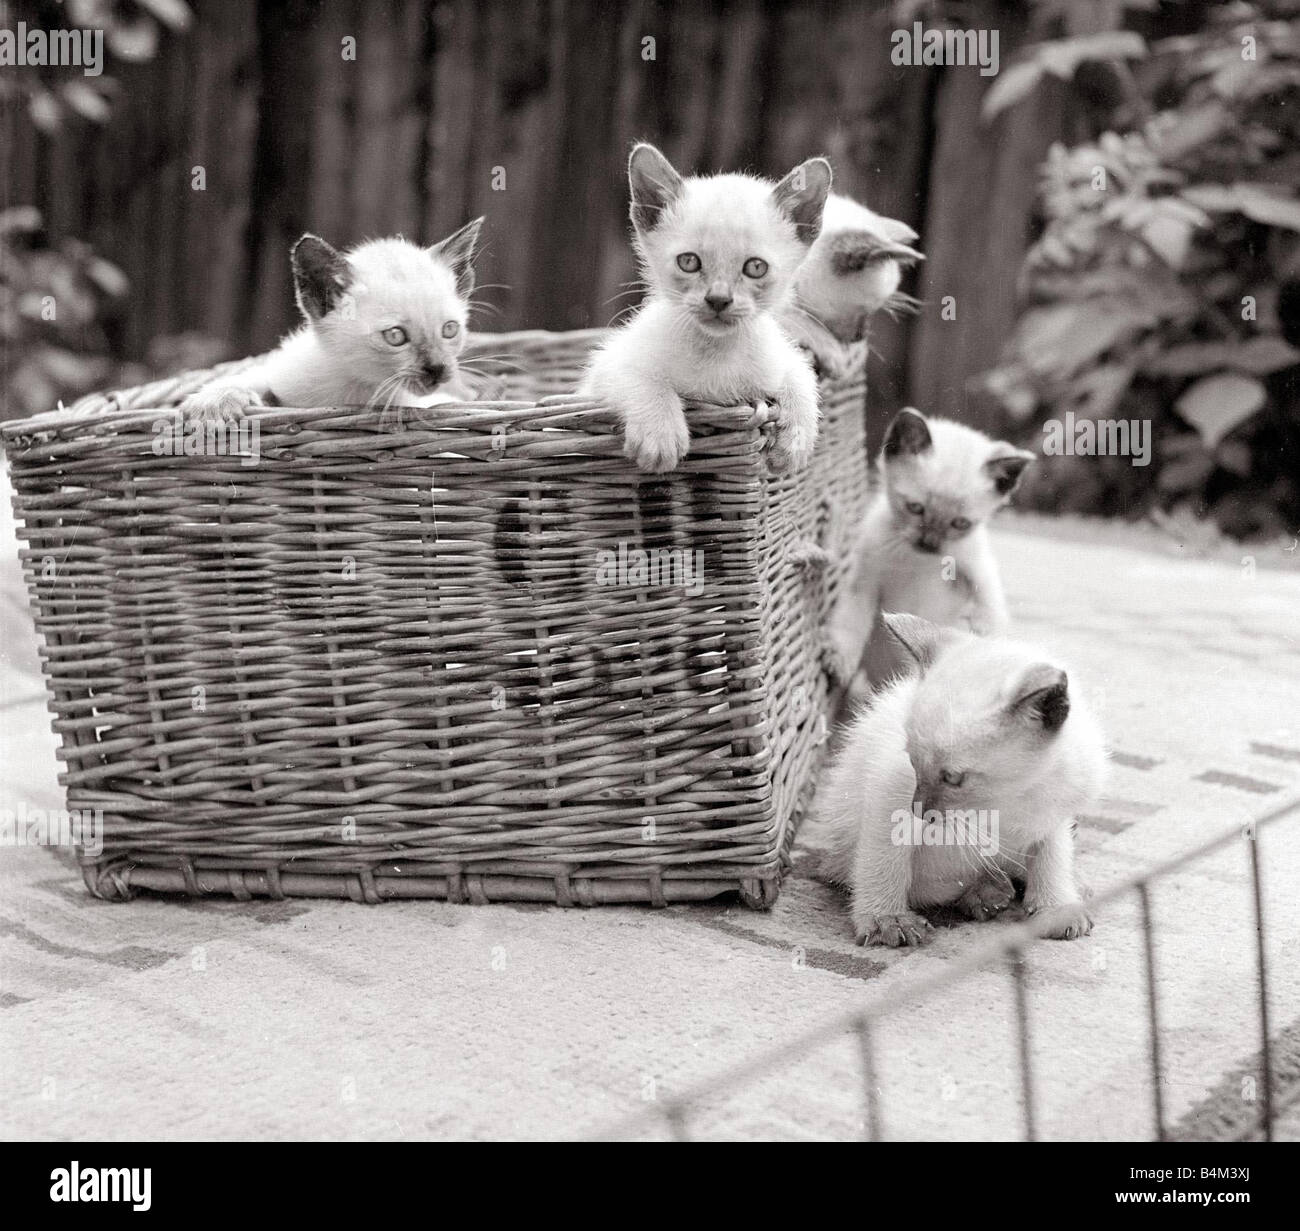 Siamese kittens playing in a basket circa 1960s cat cats animal animals pets cute wicker tiny small kitten Stock Photo